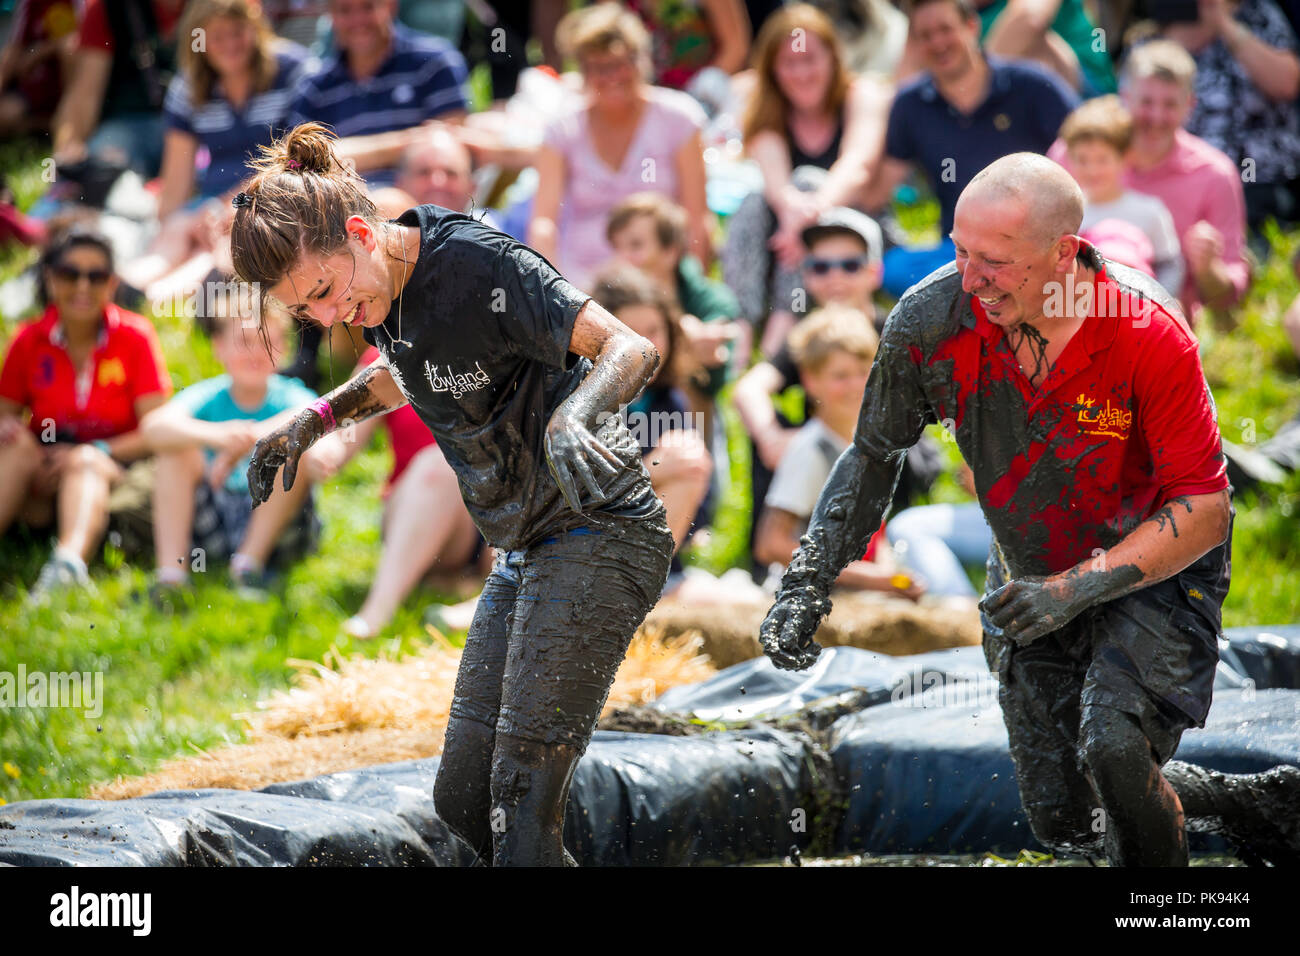 A man in a mud wrestling pit at the Lowland Games  chases a woman to make her more muddy Stock Photo